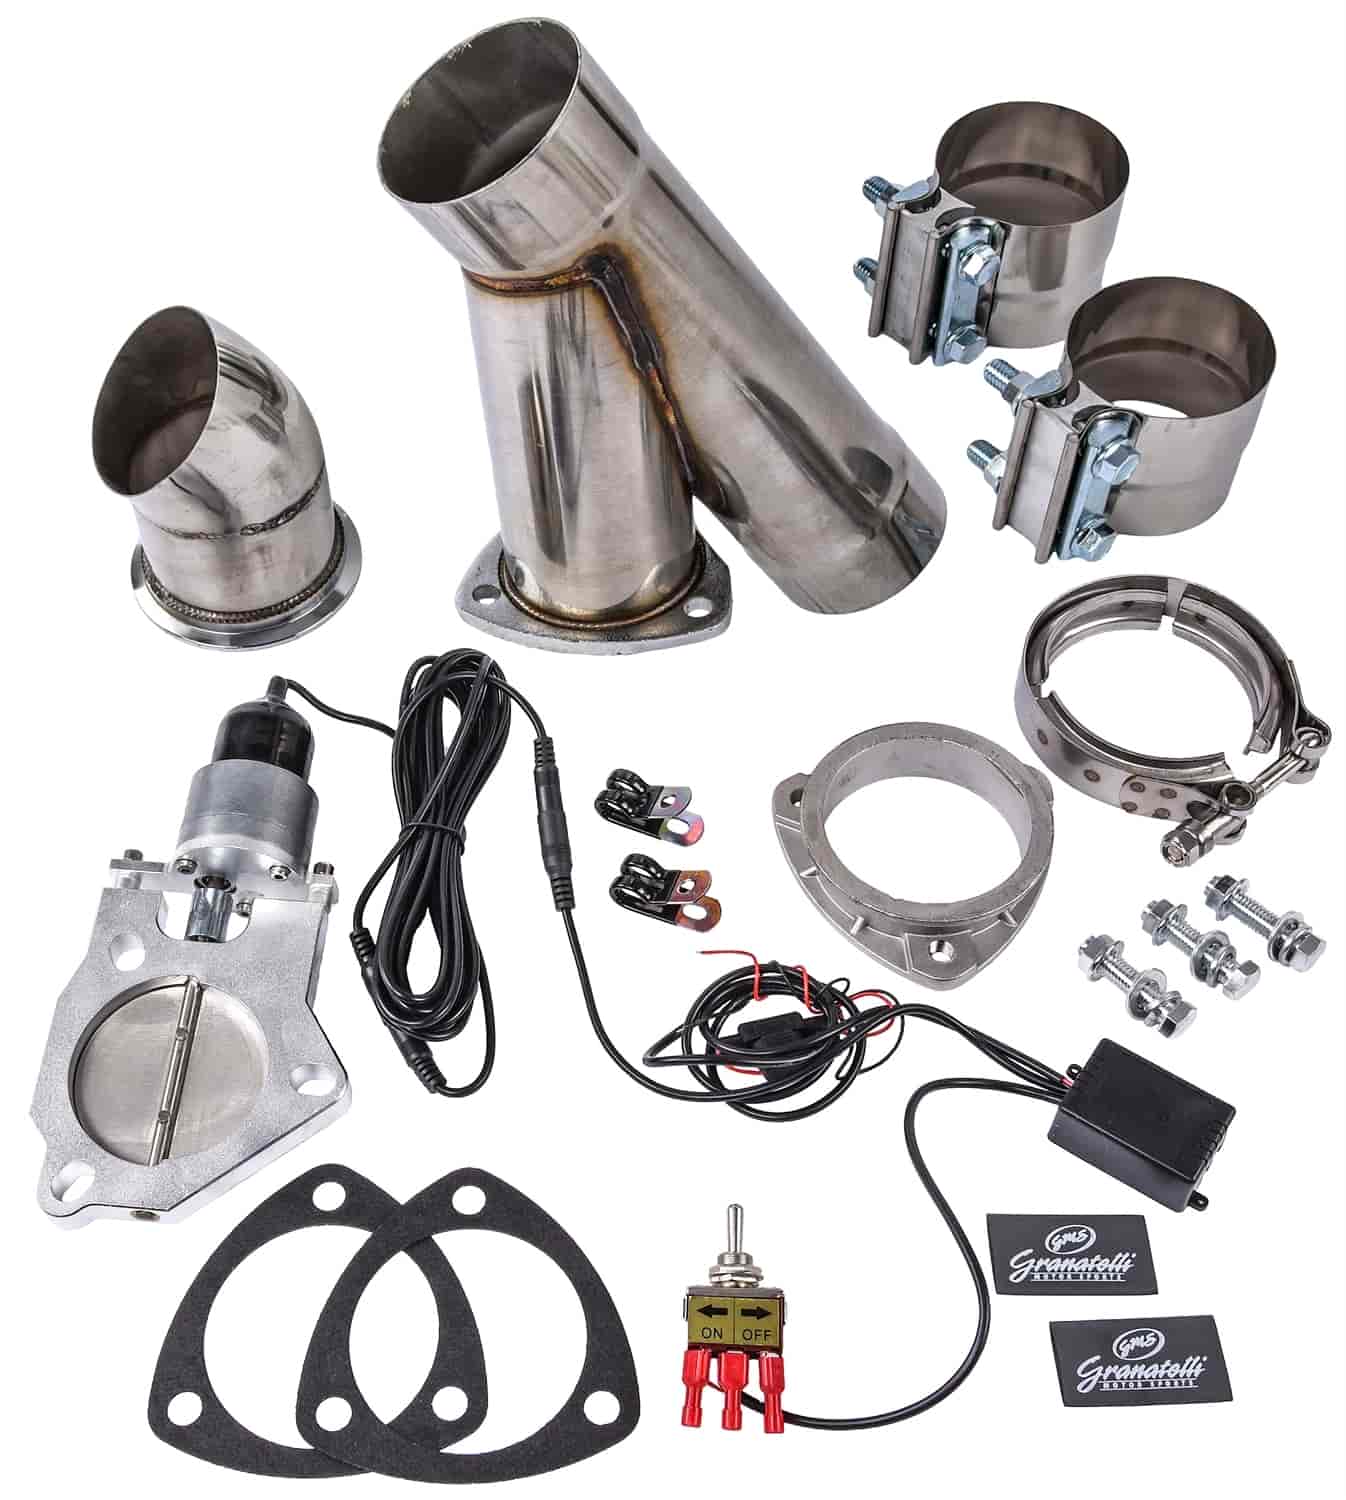 Electronic Stainless Steel Exhaust Cutout System for 3 1/2 in. Single Exhaust (Slip-Fit)